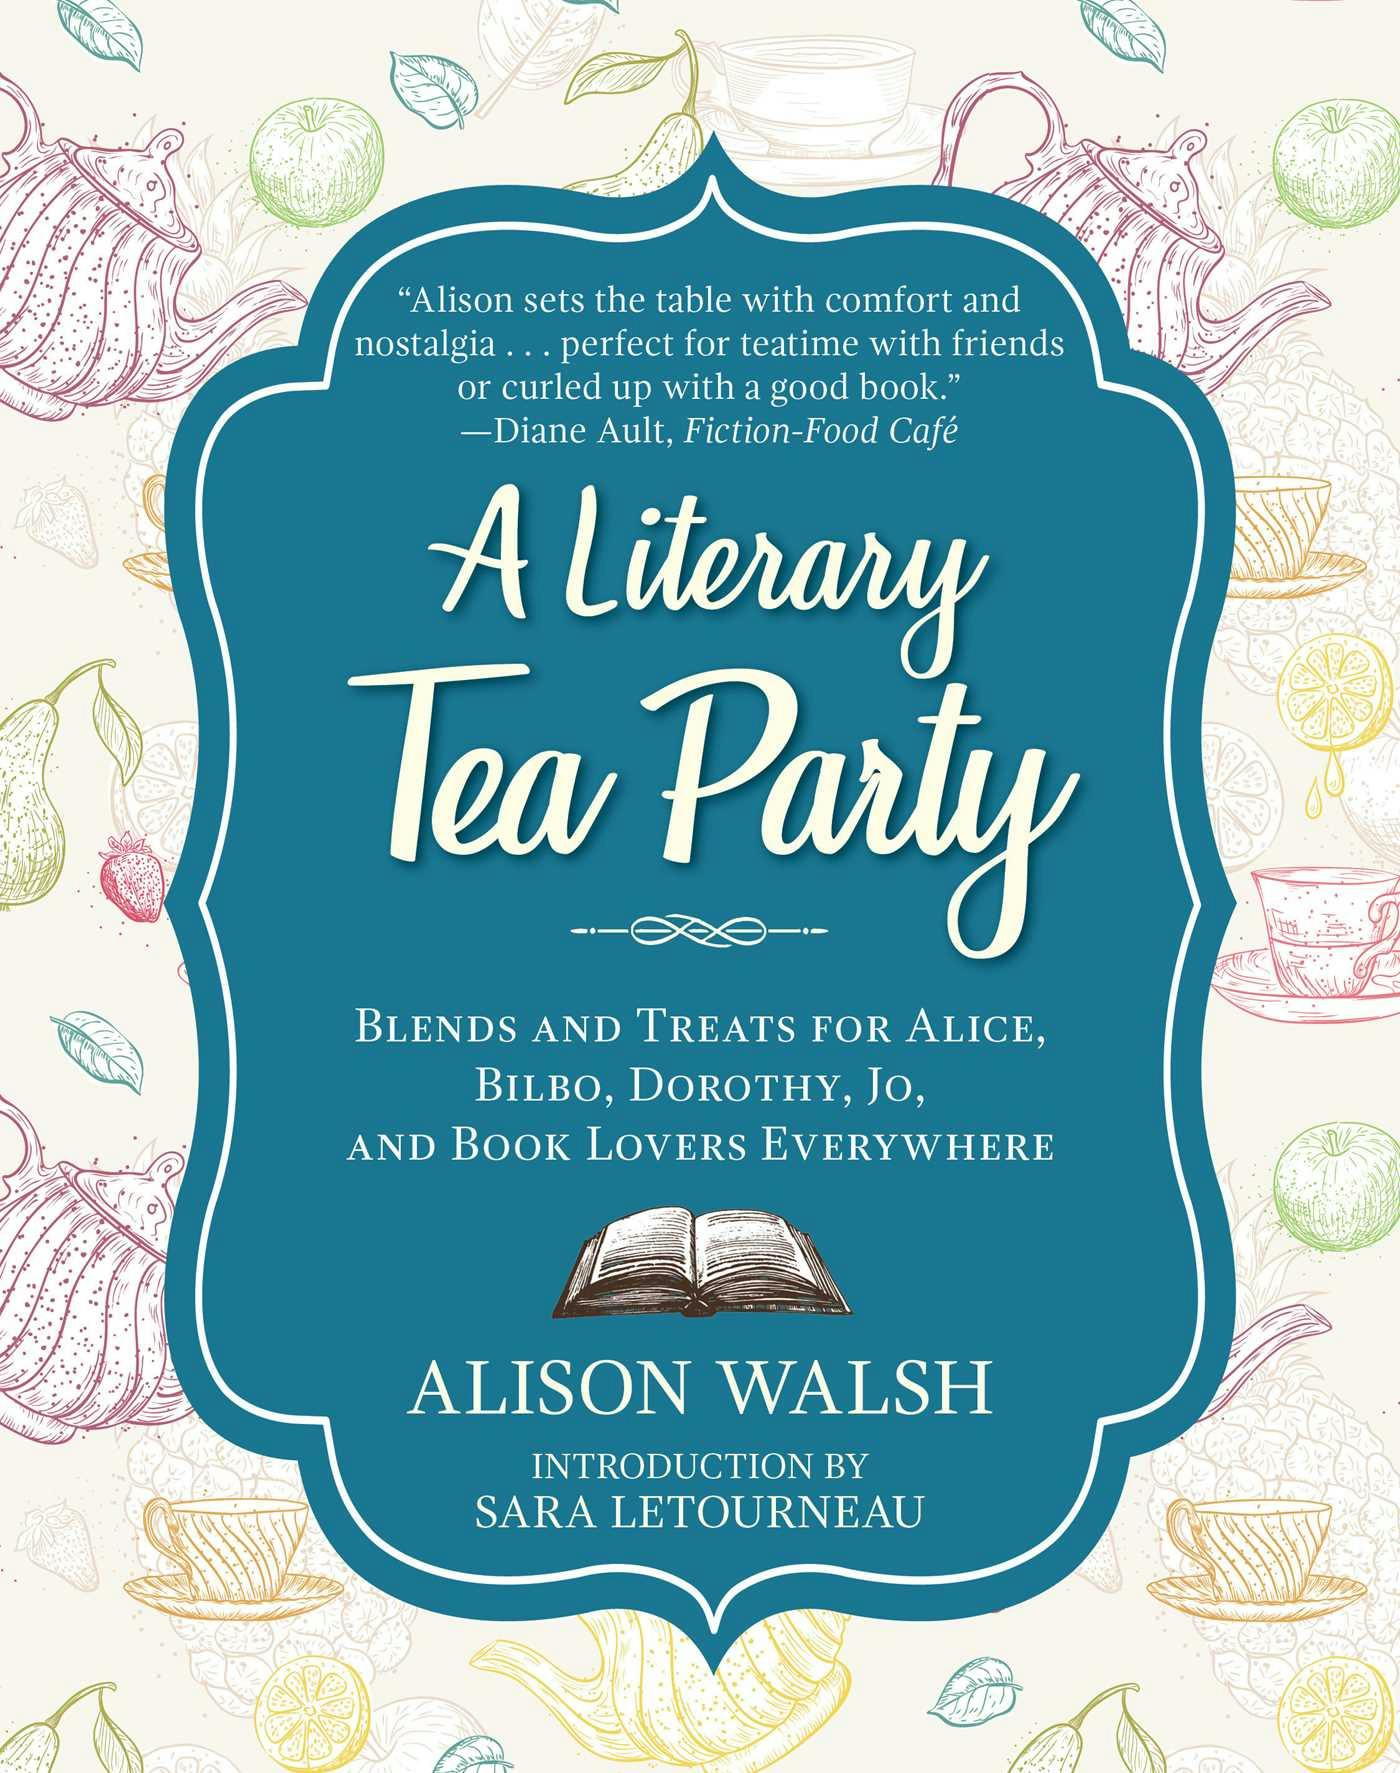 A Literary Tea Party: Blends and Treats for Alice, Bilbo, Dorothy, Jo, and Book Lovers Everywhere - Alison Walsh